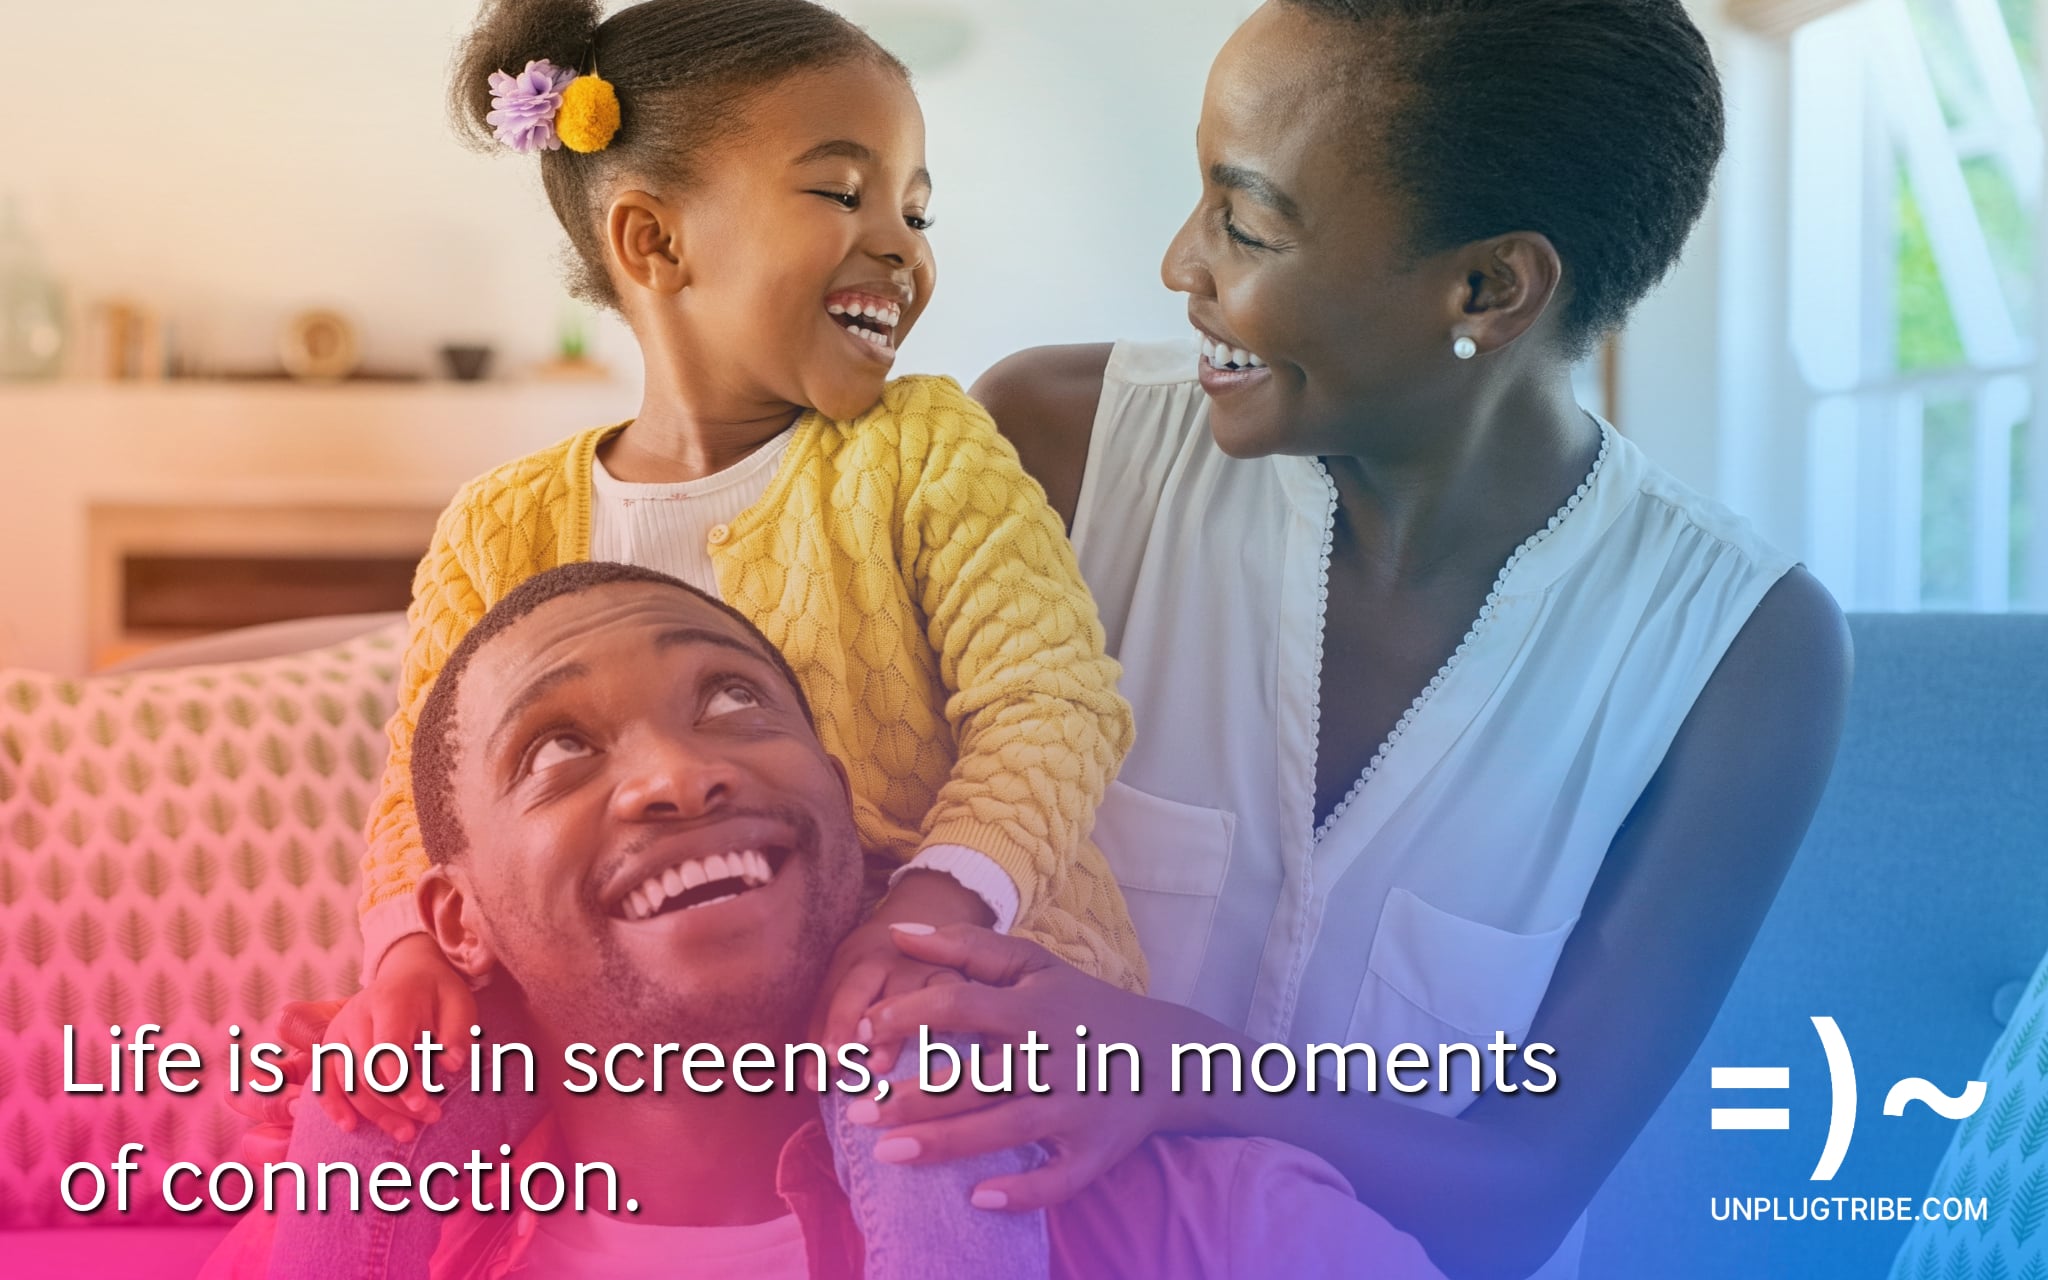 Life is not in screens, but in moments of connection